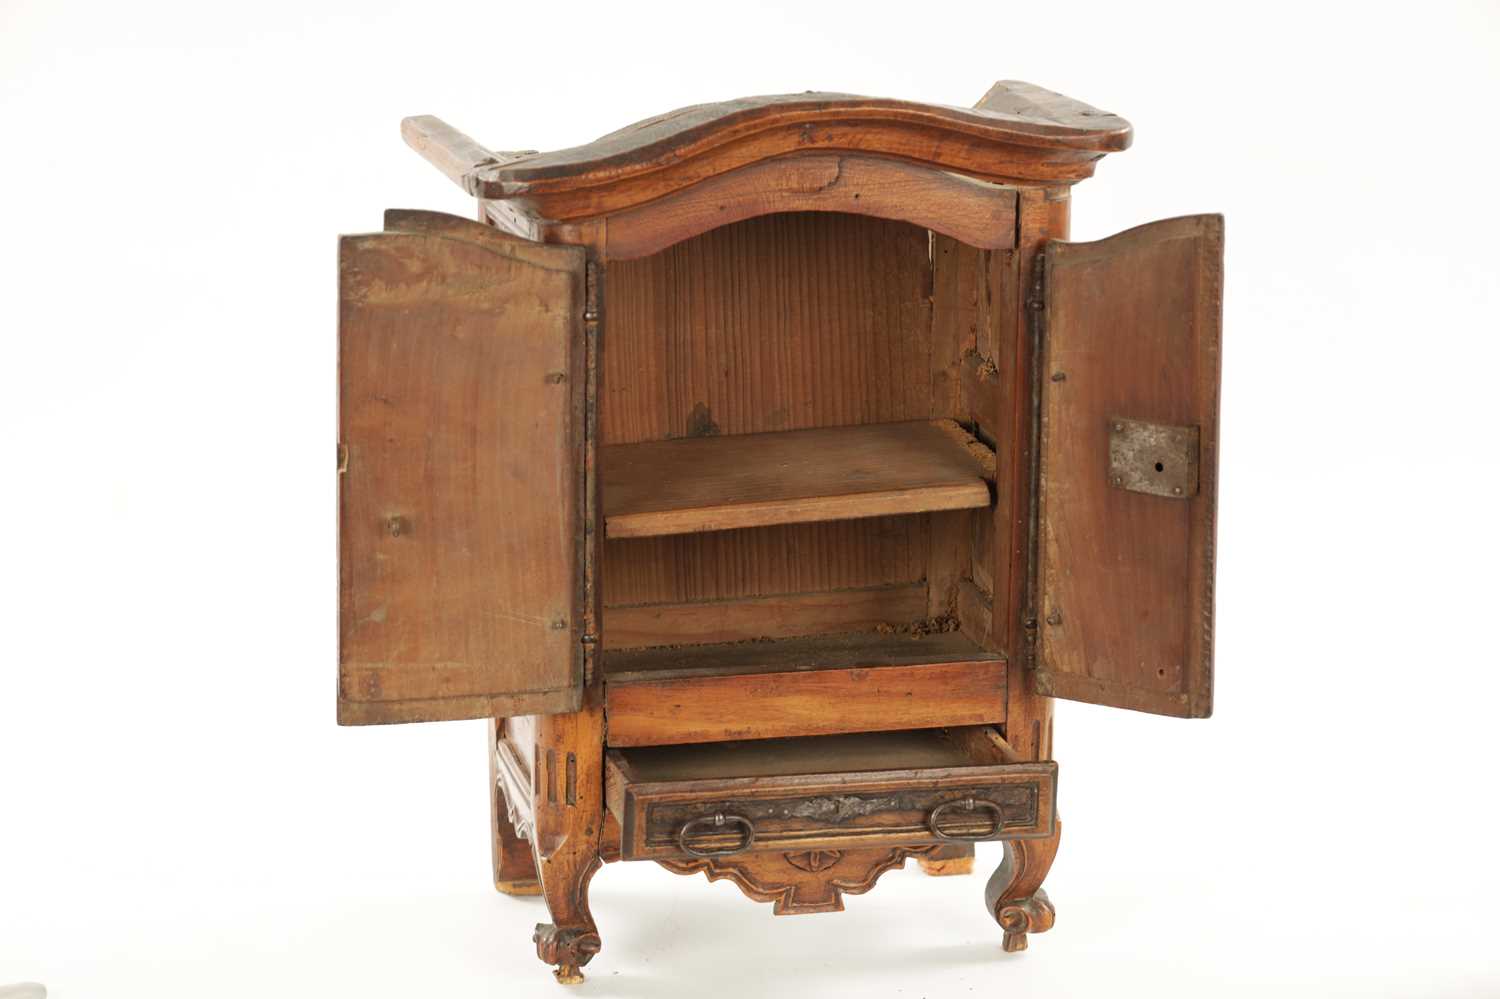 AN 18TH CENTURY FRUITWOOD MINIATURE ARMOIRE - Image 3 of 11